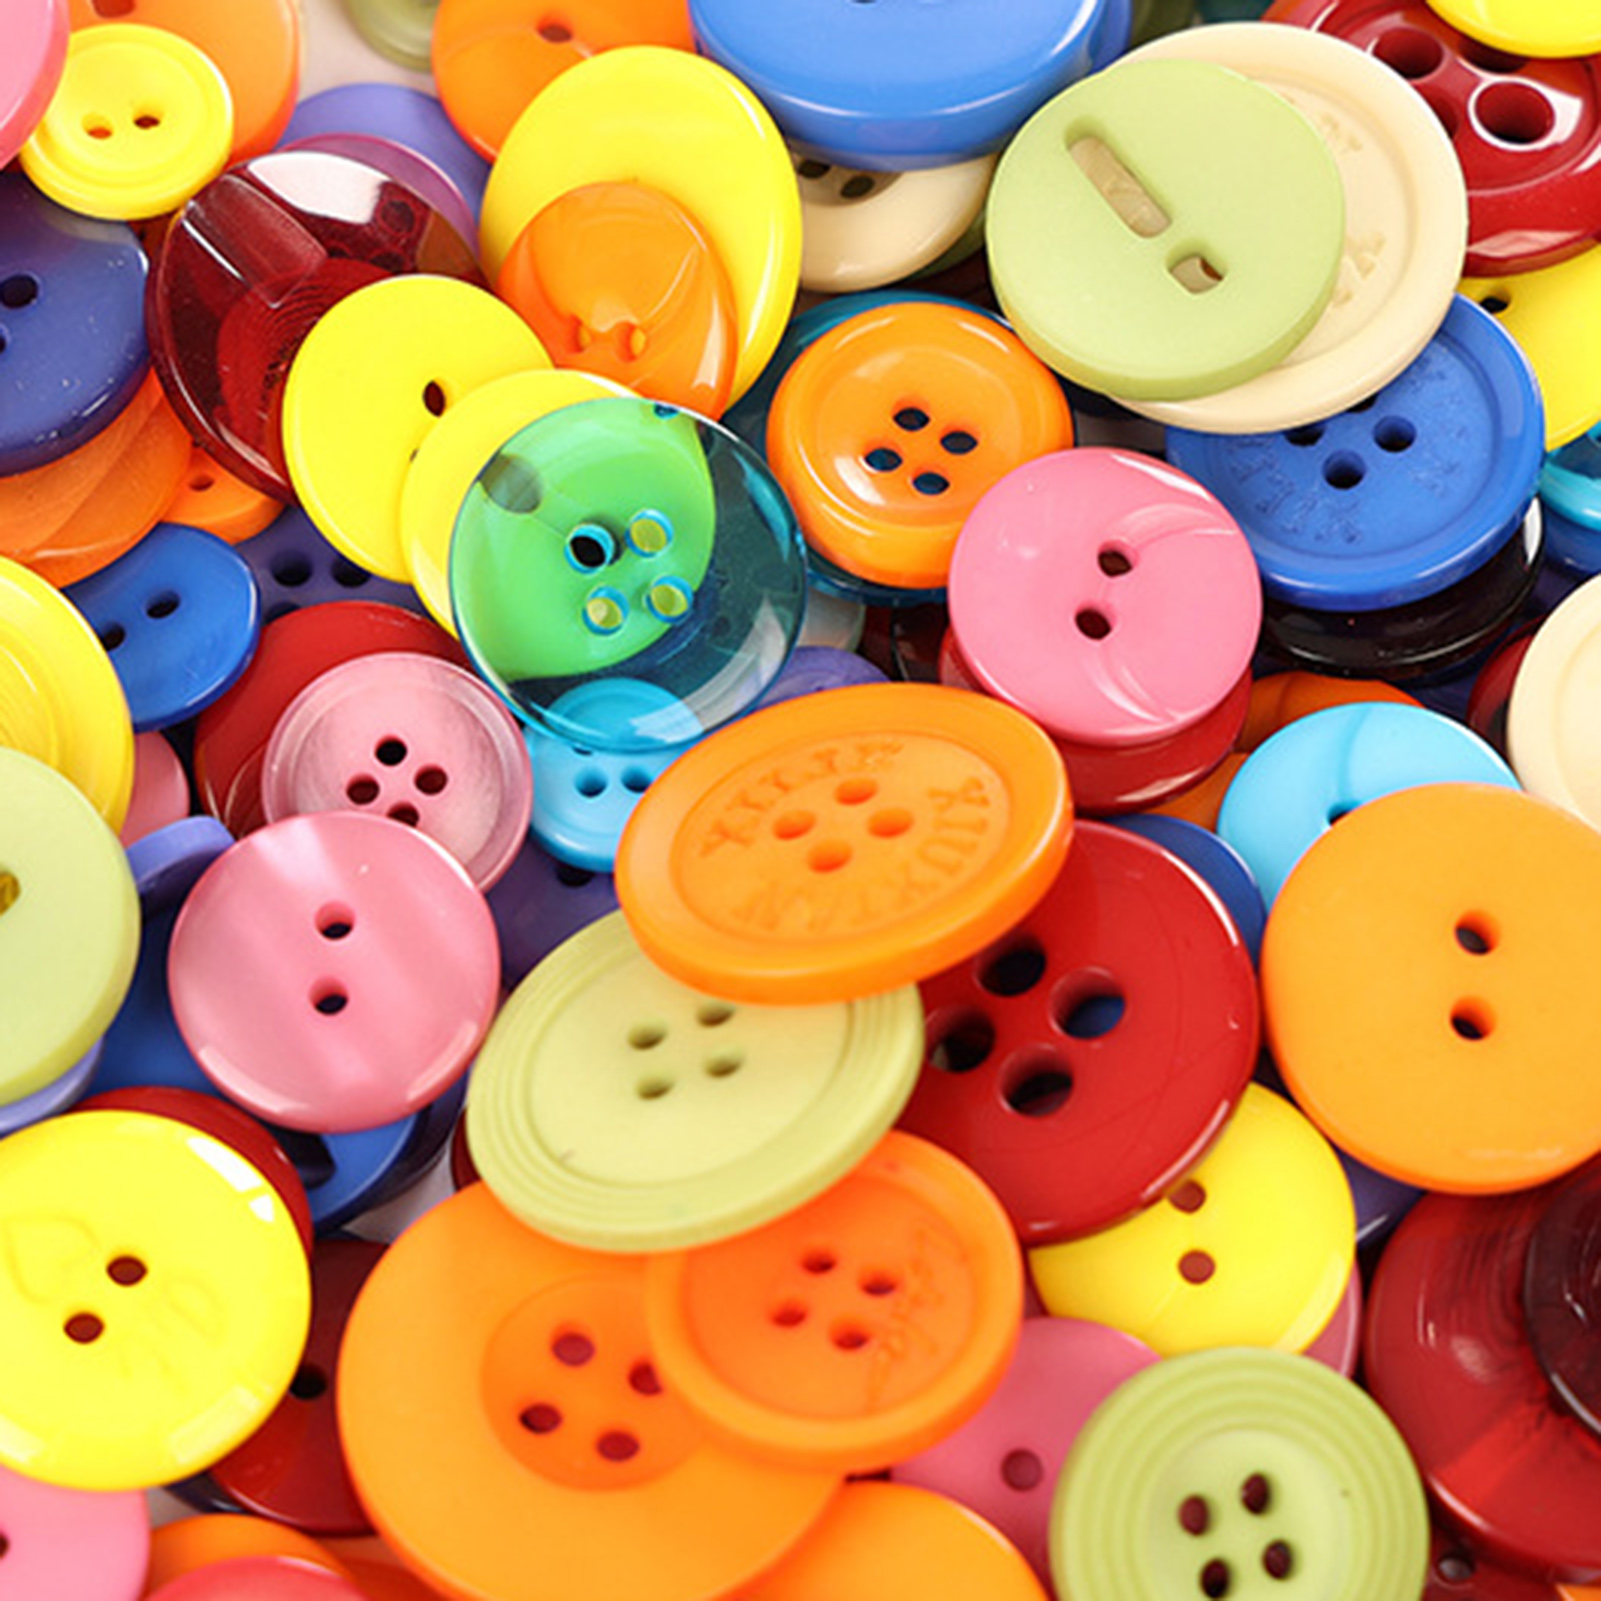 Farfi 80Pcs Colorful Buttons Sufficient Quantity Waterproof Resin DIY Resin  Buttons Collections Embellishments Birthday Gift (Orange) 